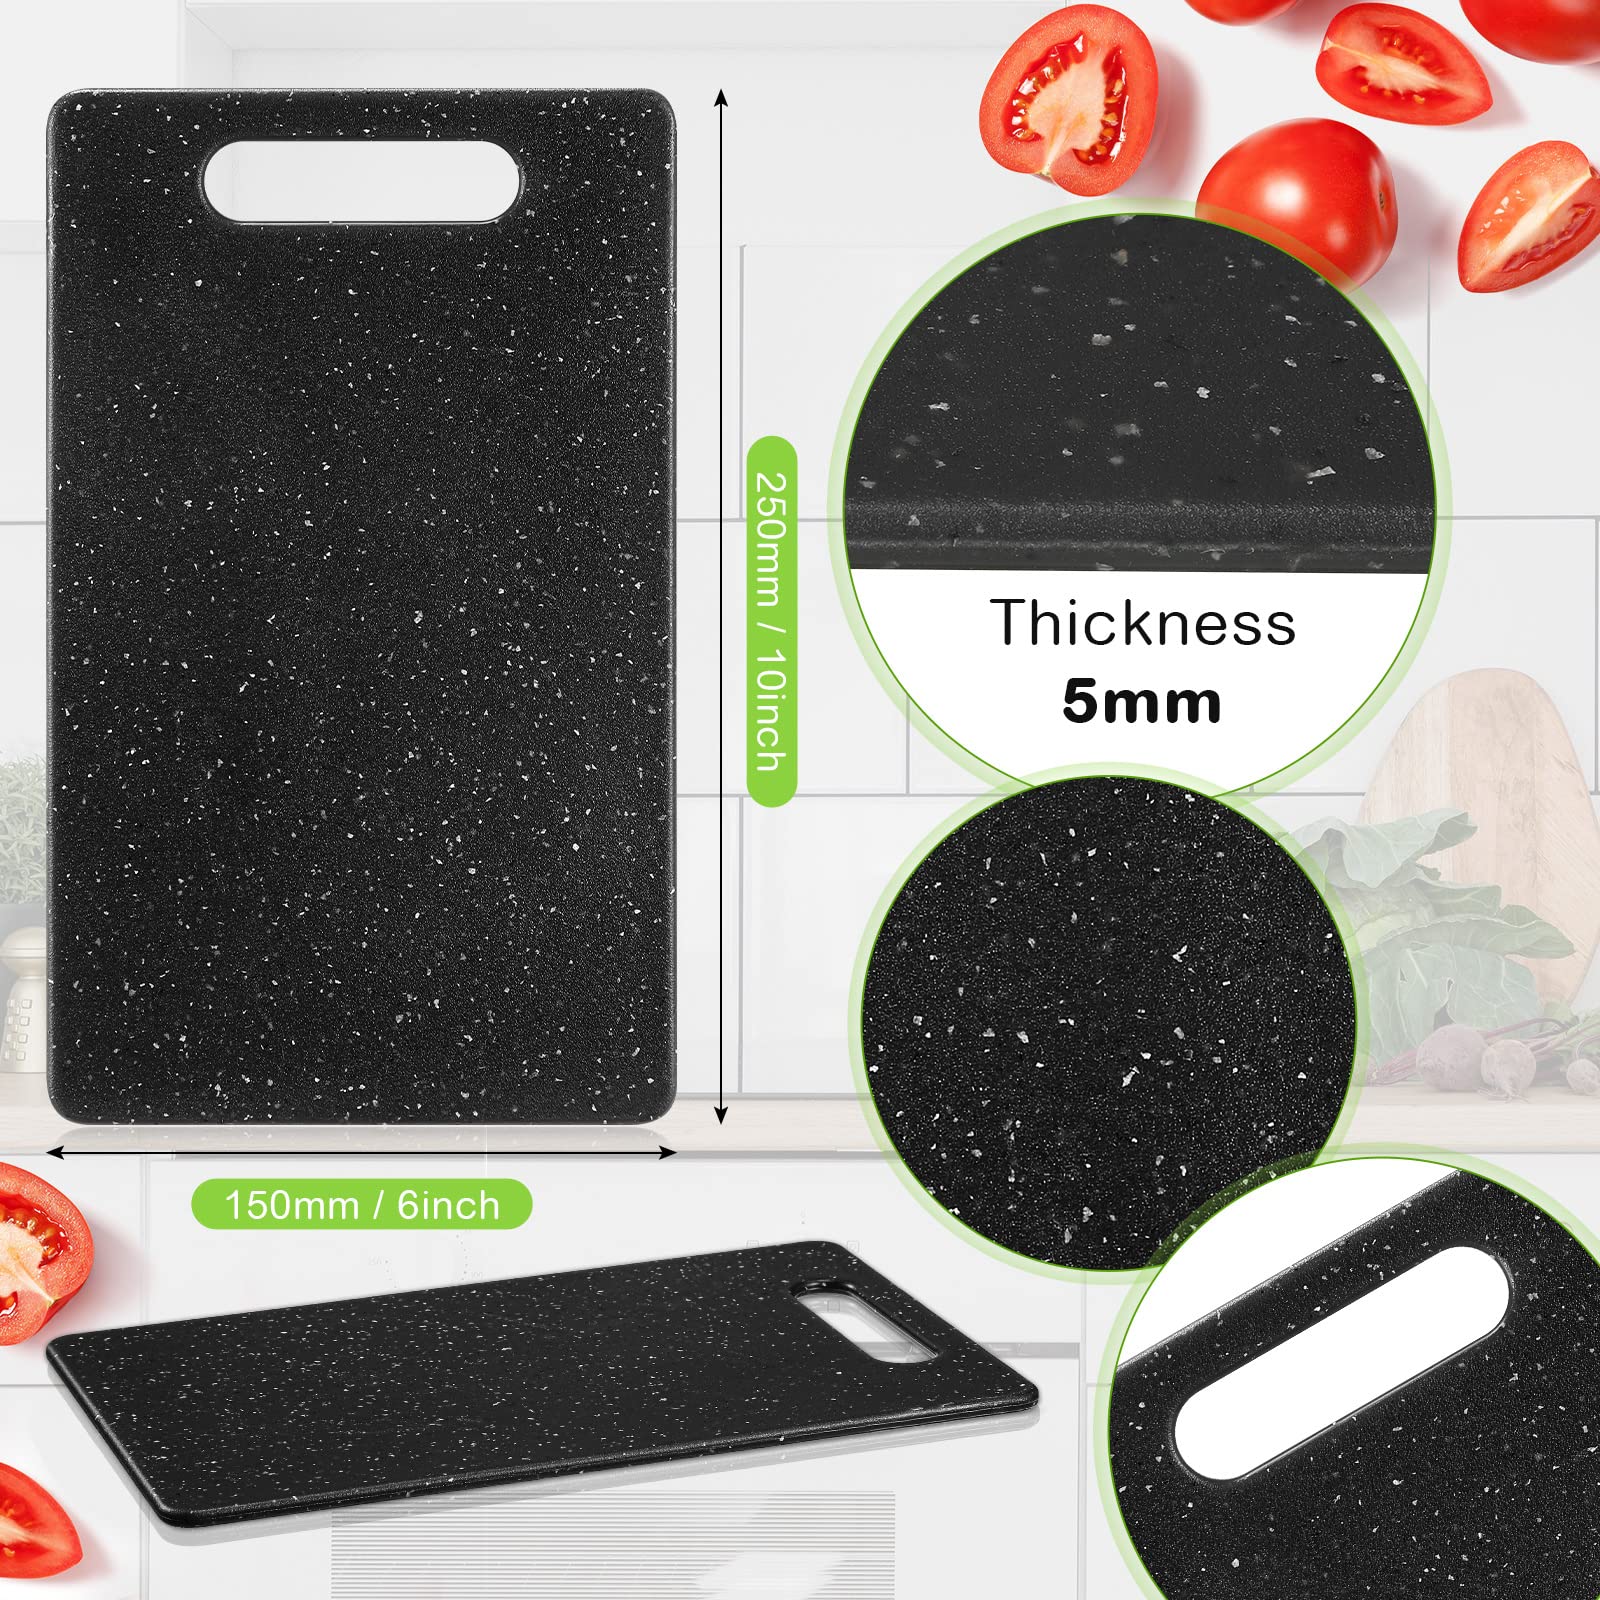 2 Pcs Small Cutting Board for Kitchen Mini Plastic Cutting Board Set Bar Dishwasher Safe Granite Color Cutting Board for Camping Food Fruits Prep Vegetables Easy Grip (Black, 6" x 10")